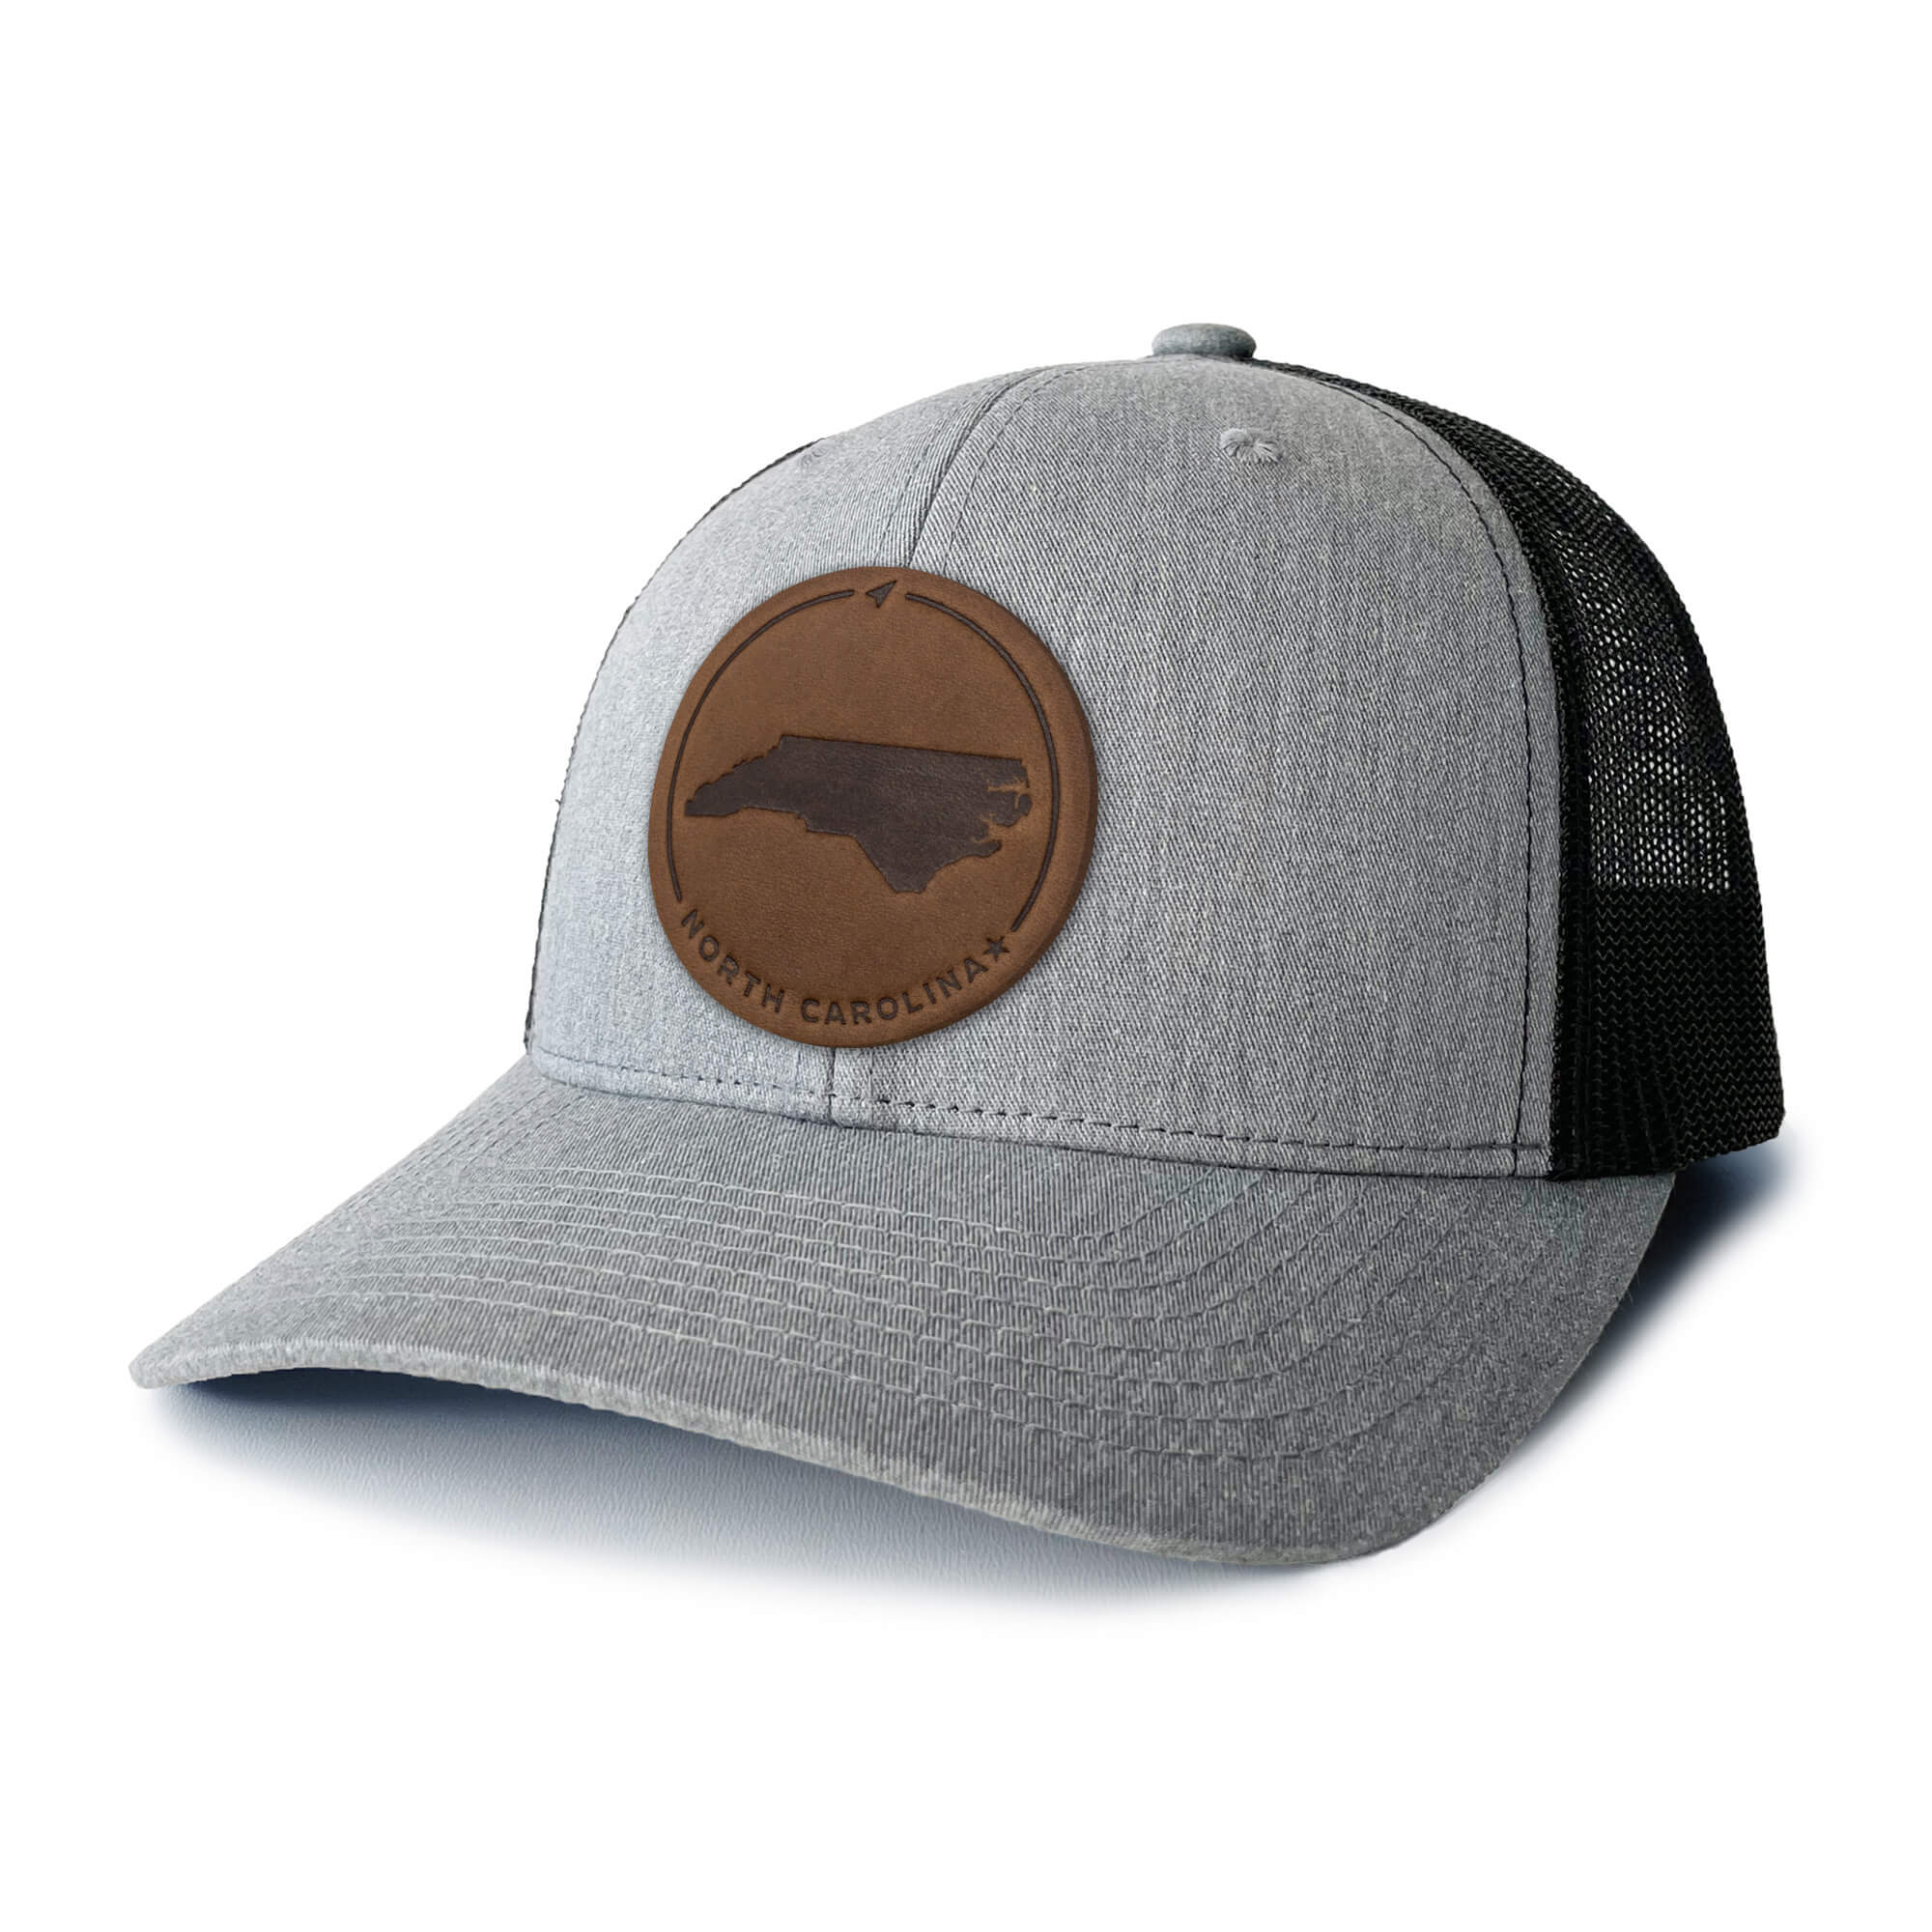 Heather Grey and white trucker hat with full-grain leather patch of North Carolina | BLACK-003-005, CHARC-003-005, NAVY-003-005, HGREY-003-005, MOSS-003-005, BROWN-003-005 Edit alt text